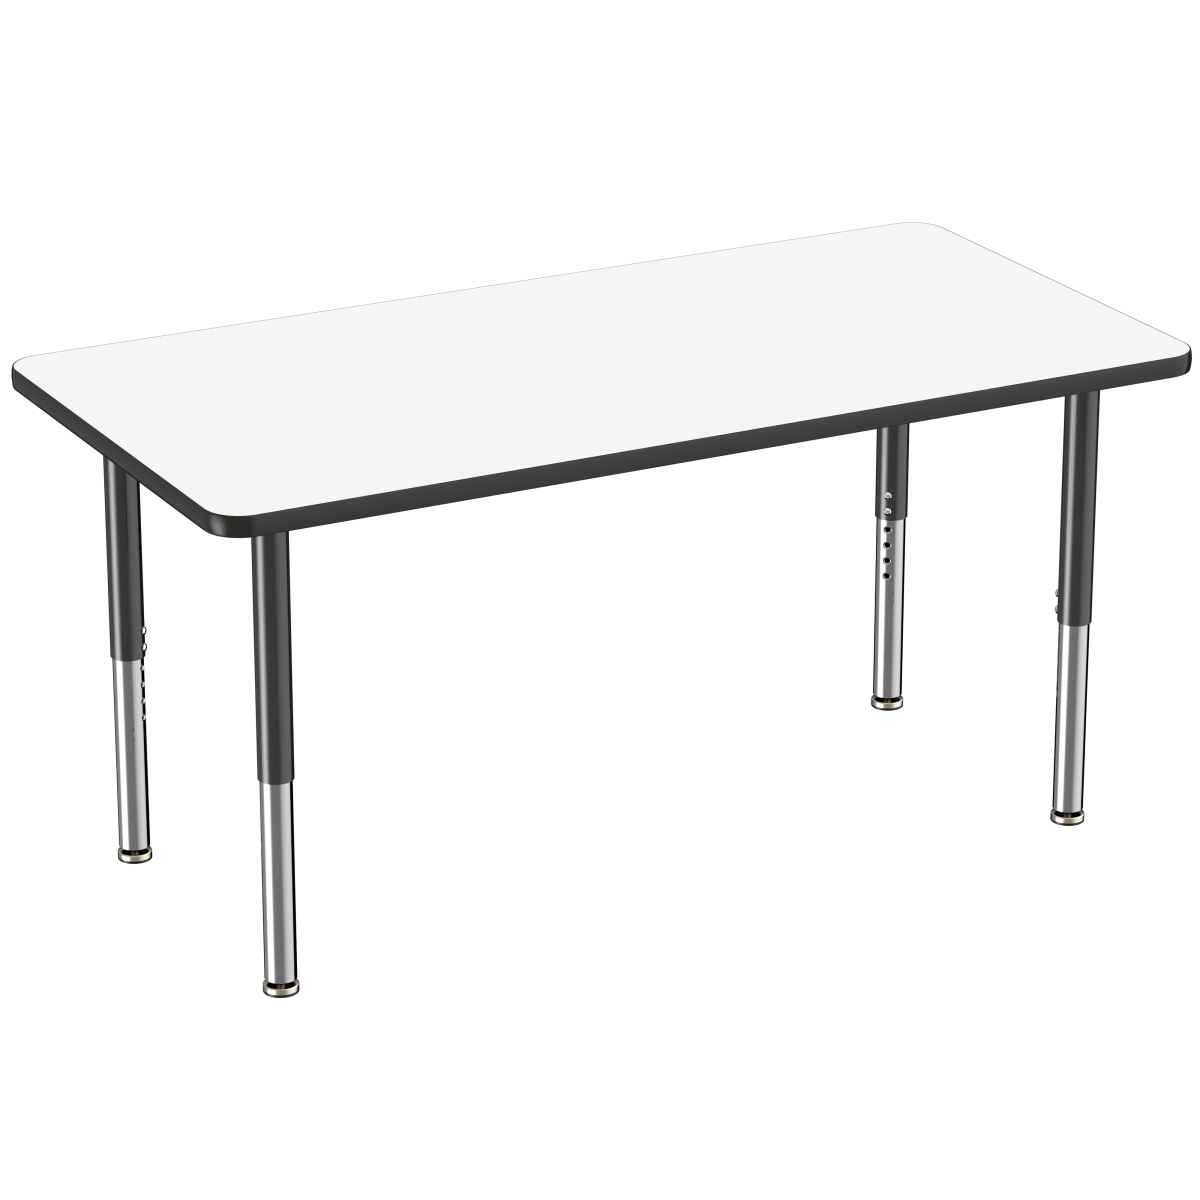 10179-debk 30 X 60 In. Rectangle Dry-erase Adjustable Activity Table With Super Leg - Black